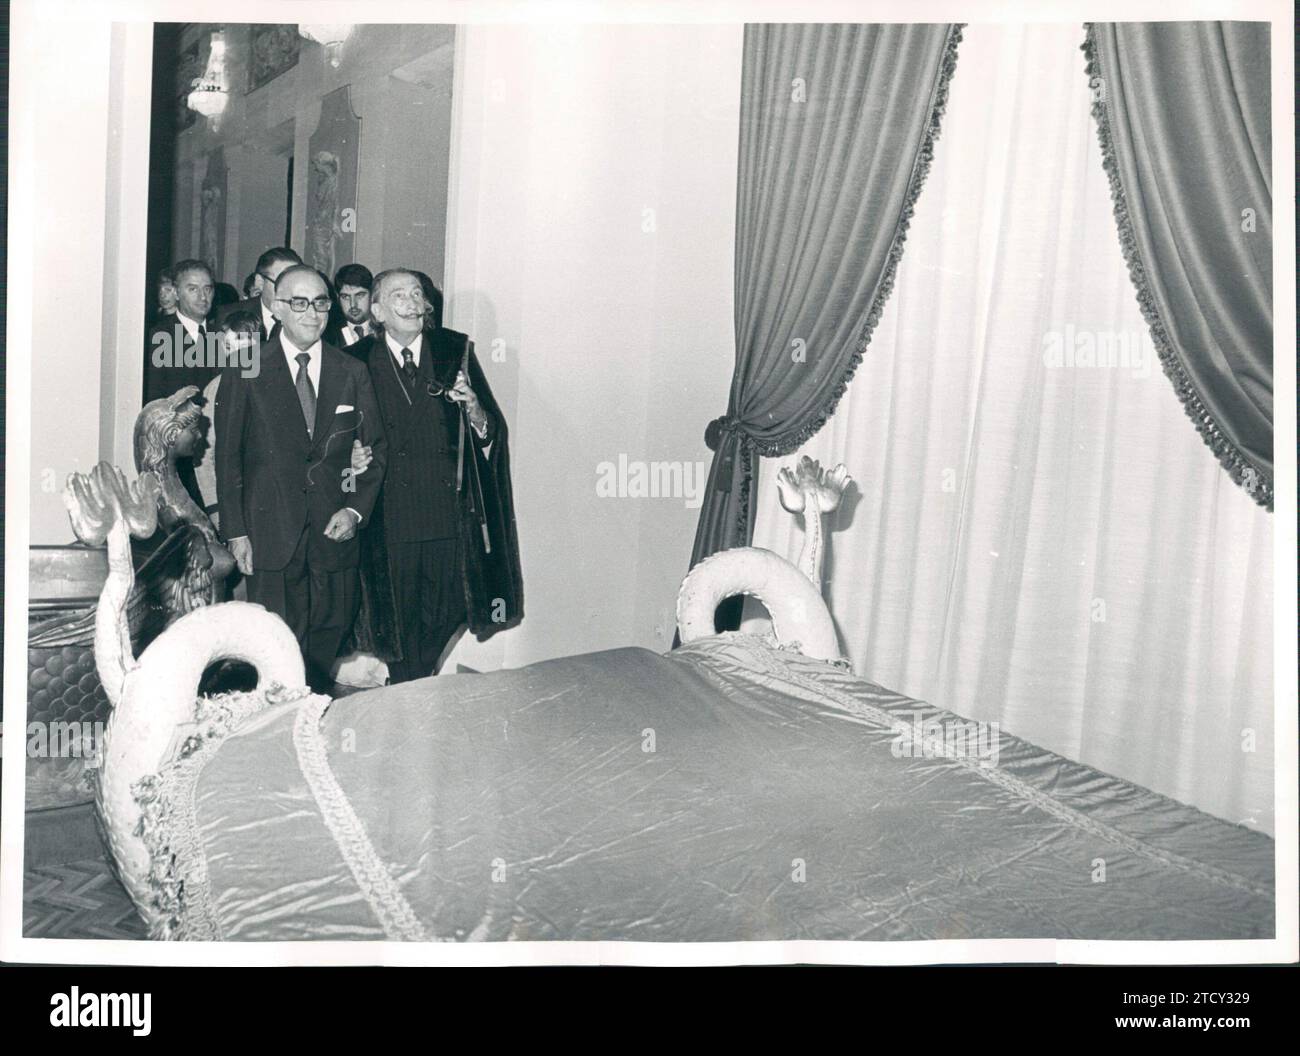 Figueras (Gerona), 9/29/1974. Inauguration of the Dalí Theater Museum. In the image, Dalí with the Minister of the Interior José García Hernández. Credit: Album / Archivo ABC / Juan Cid Stock Photo